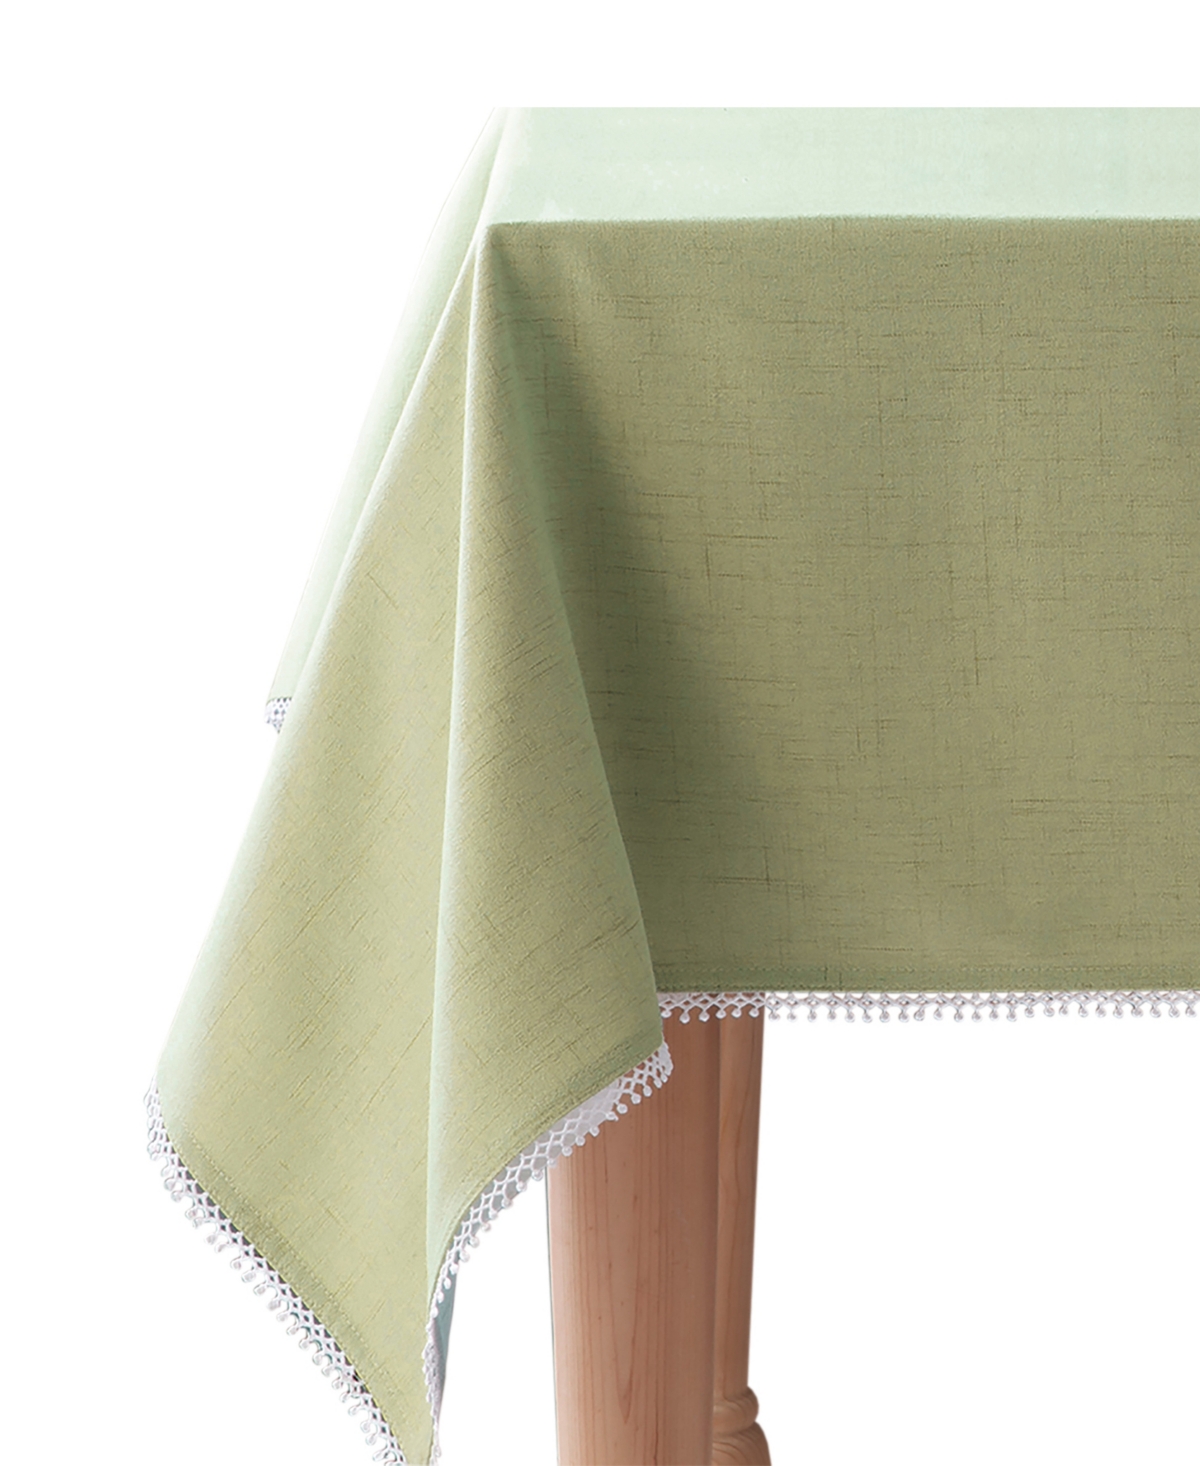 Lenox French Perle Tablecloth, 52" X 70" In Pistachio